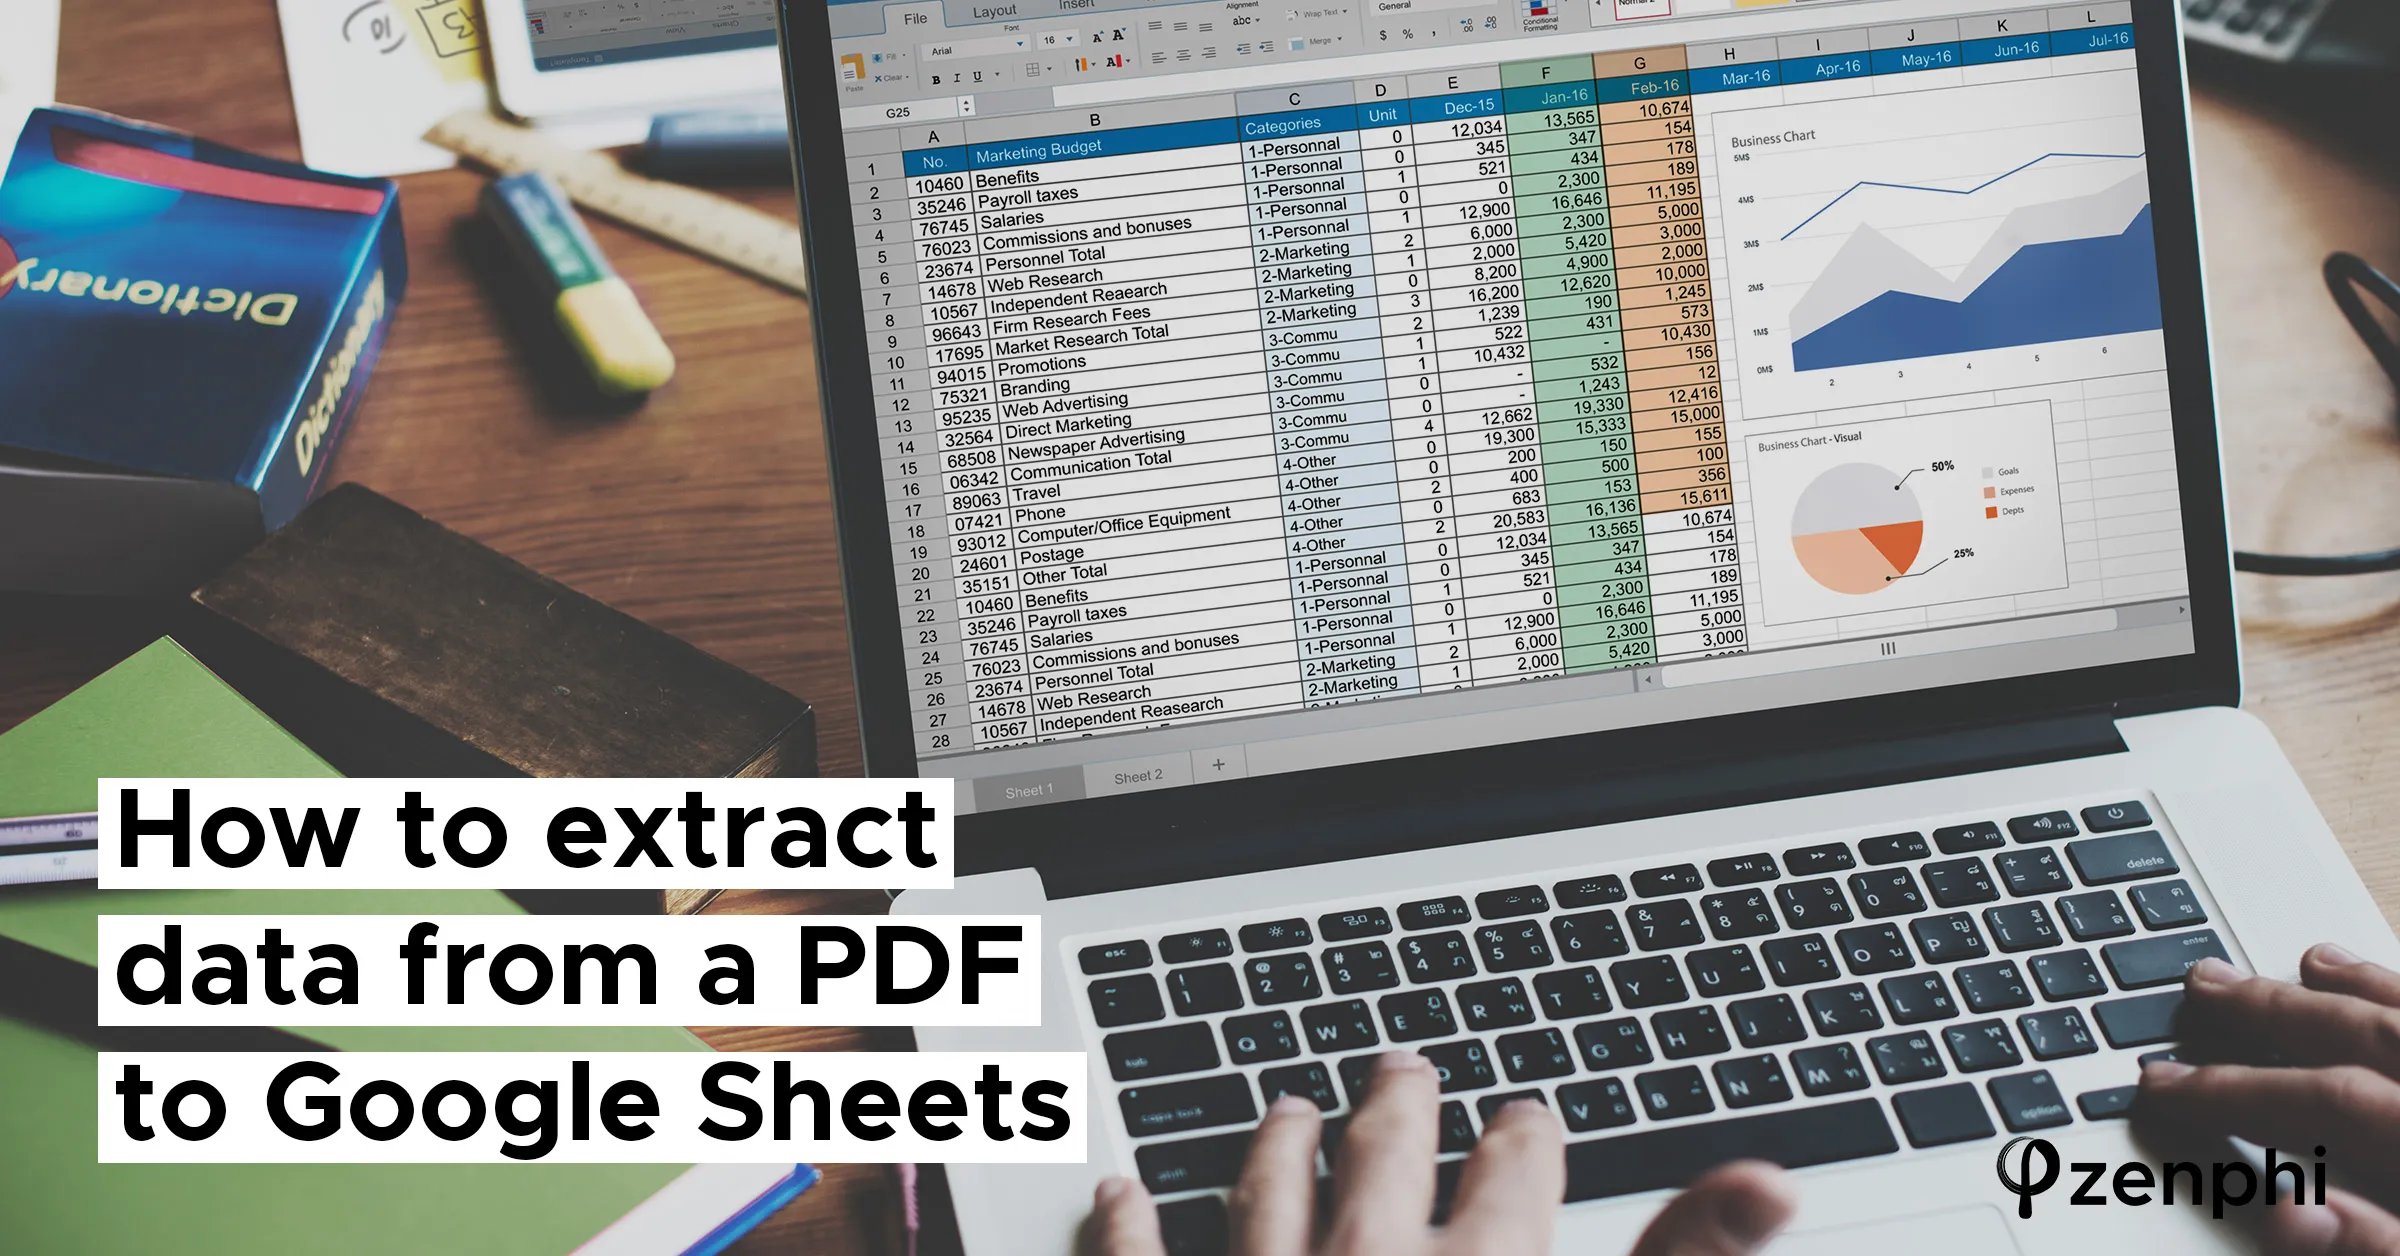 How to extract data from a PDF to Google Sheets